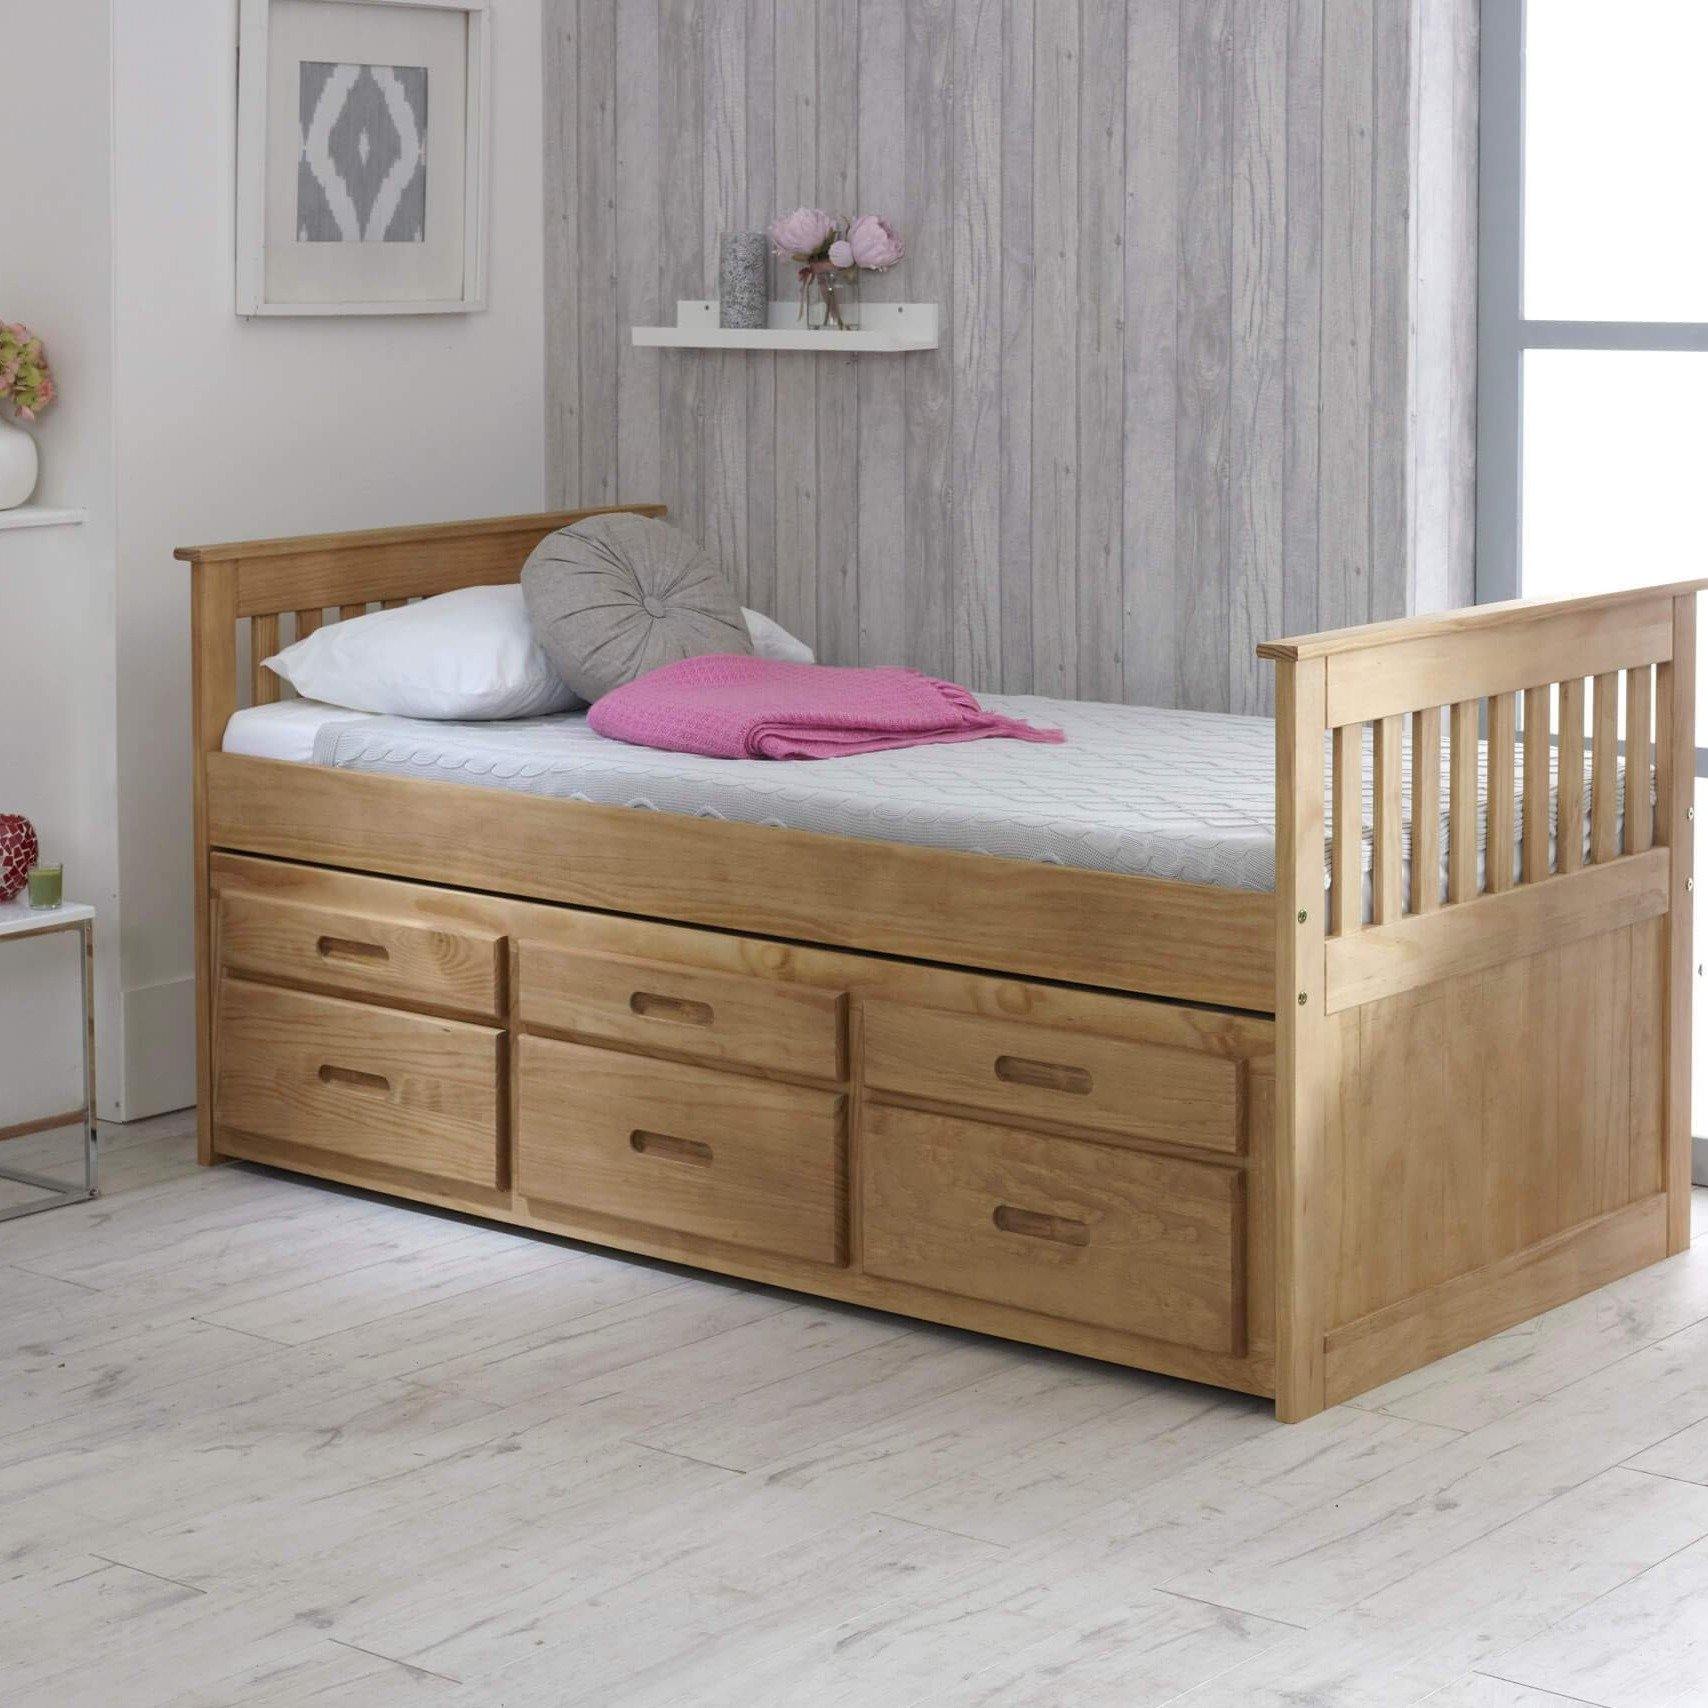 Leo Single Bed with Trundle Guest Bed - Millie & Jones